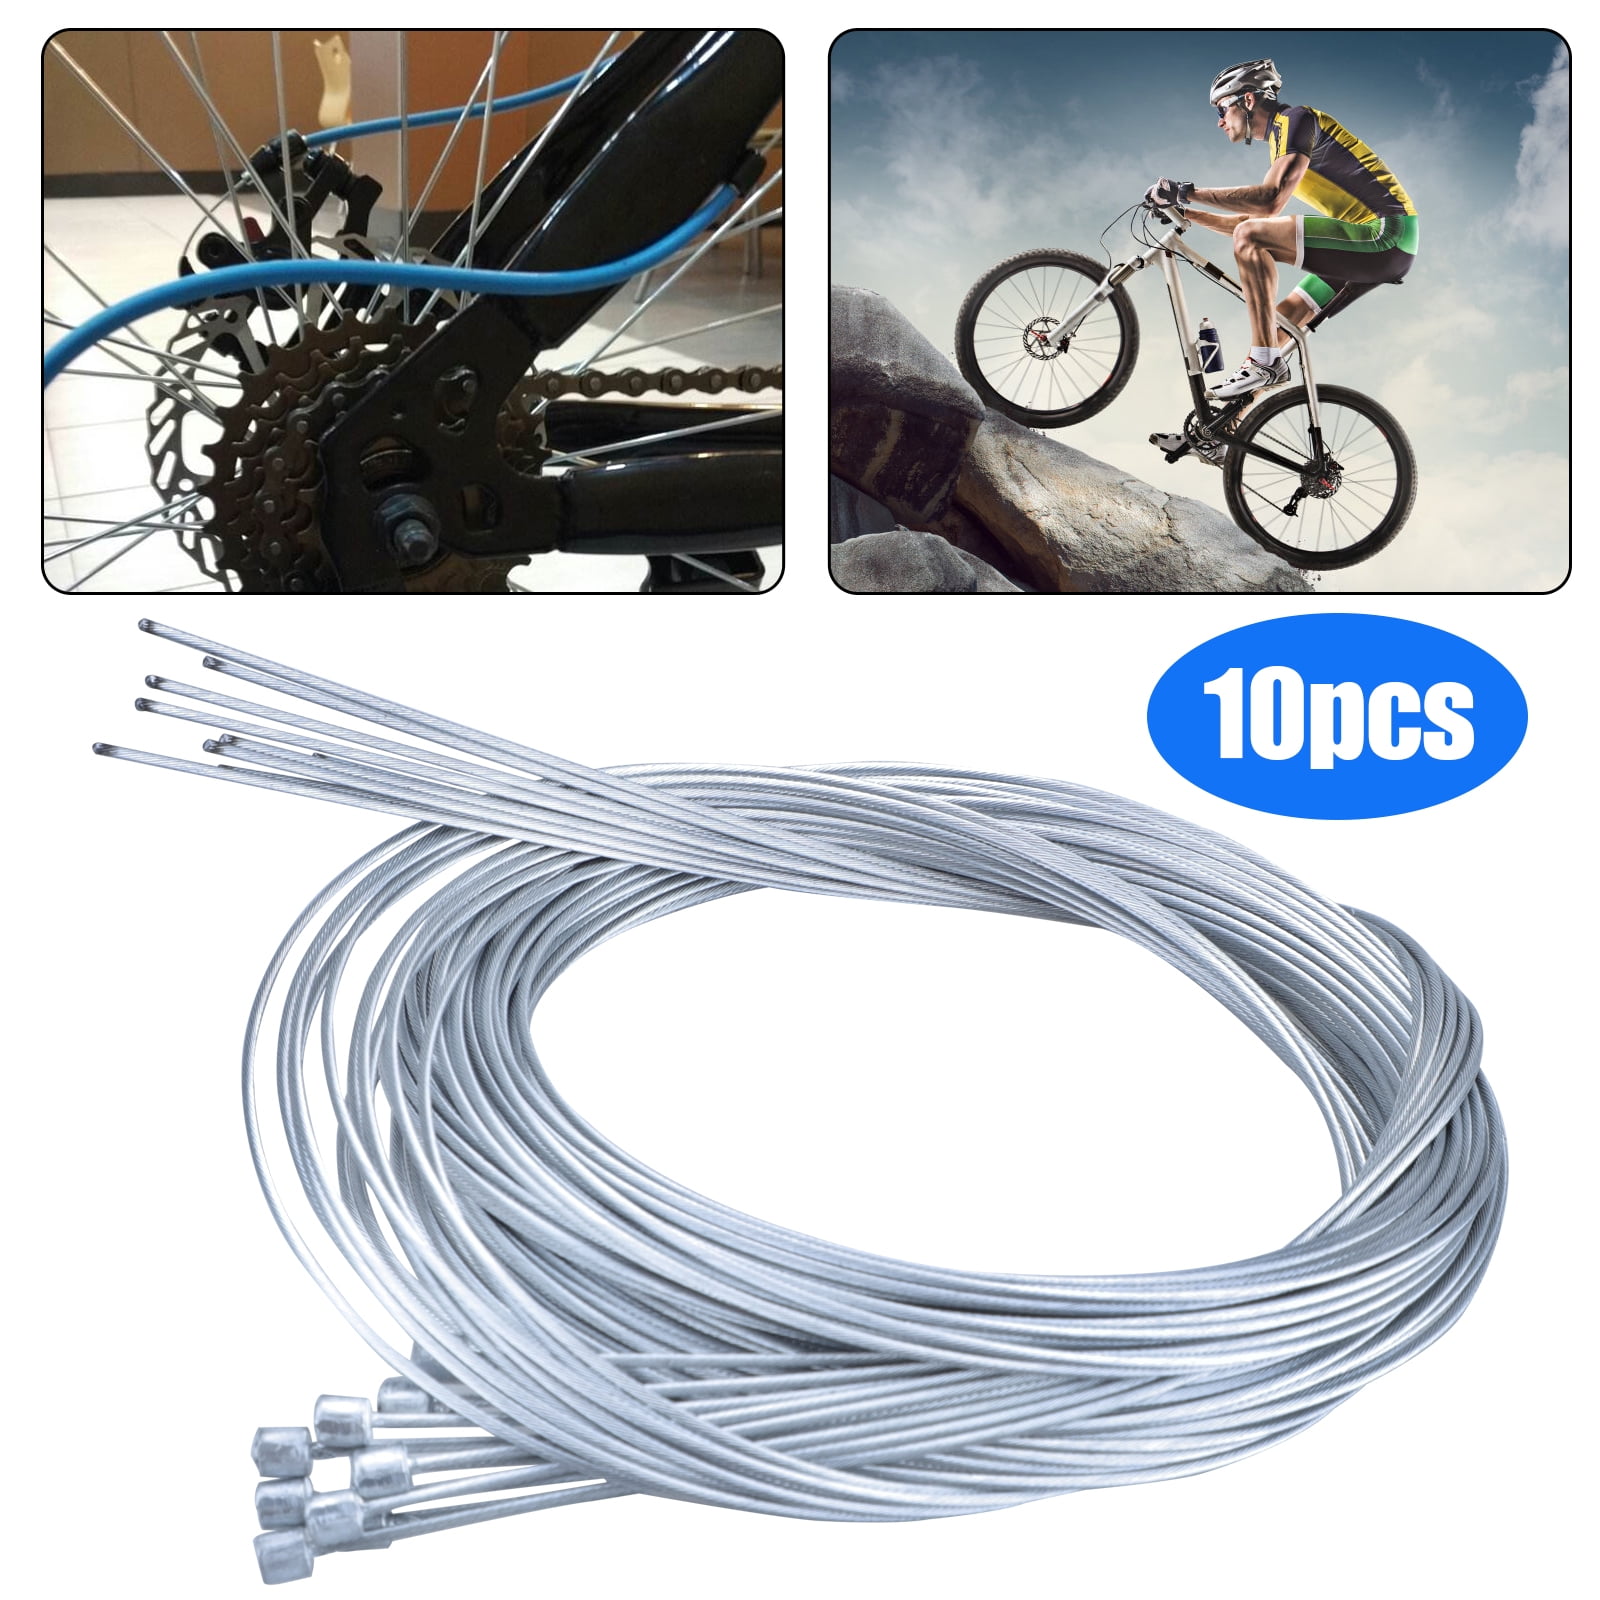 10 Pcs 2M / 6.56 Feet Bicycle Derailleur Cable Bike Brake Cable Inner Gear Cables Shift Cable for Mountain Bike Folding Bike Bike Derailleur Cable Road Bike 